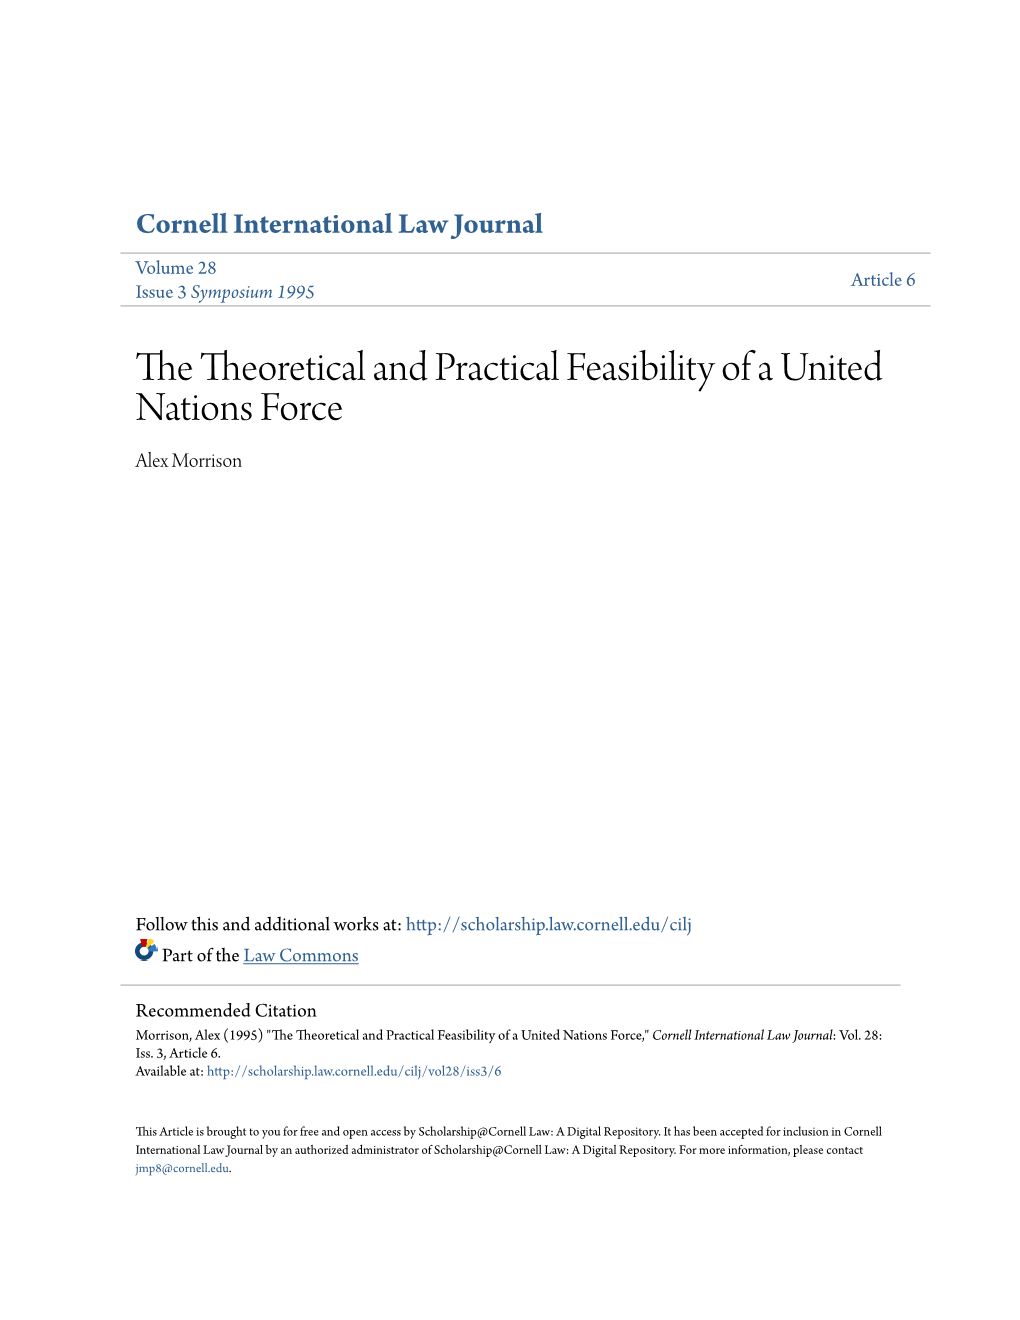 The Theoretical and Practical Feasibility of a United Nations Force Alex Morrison